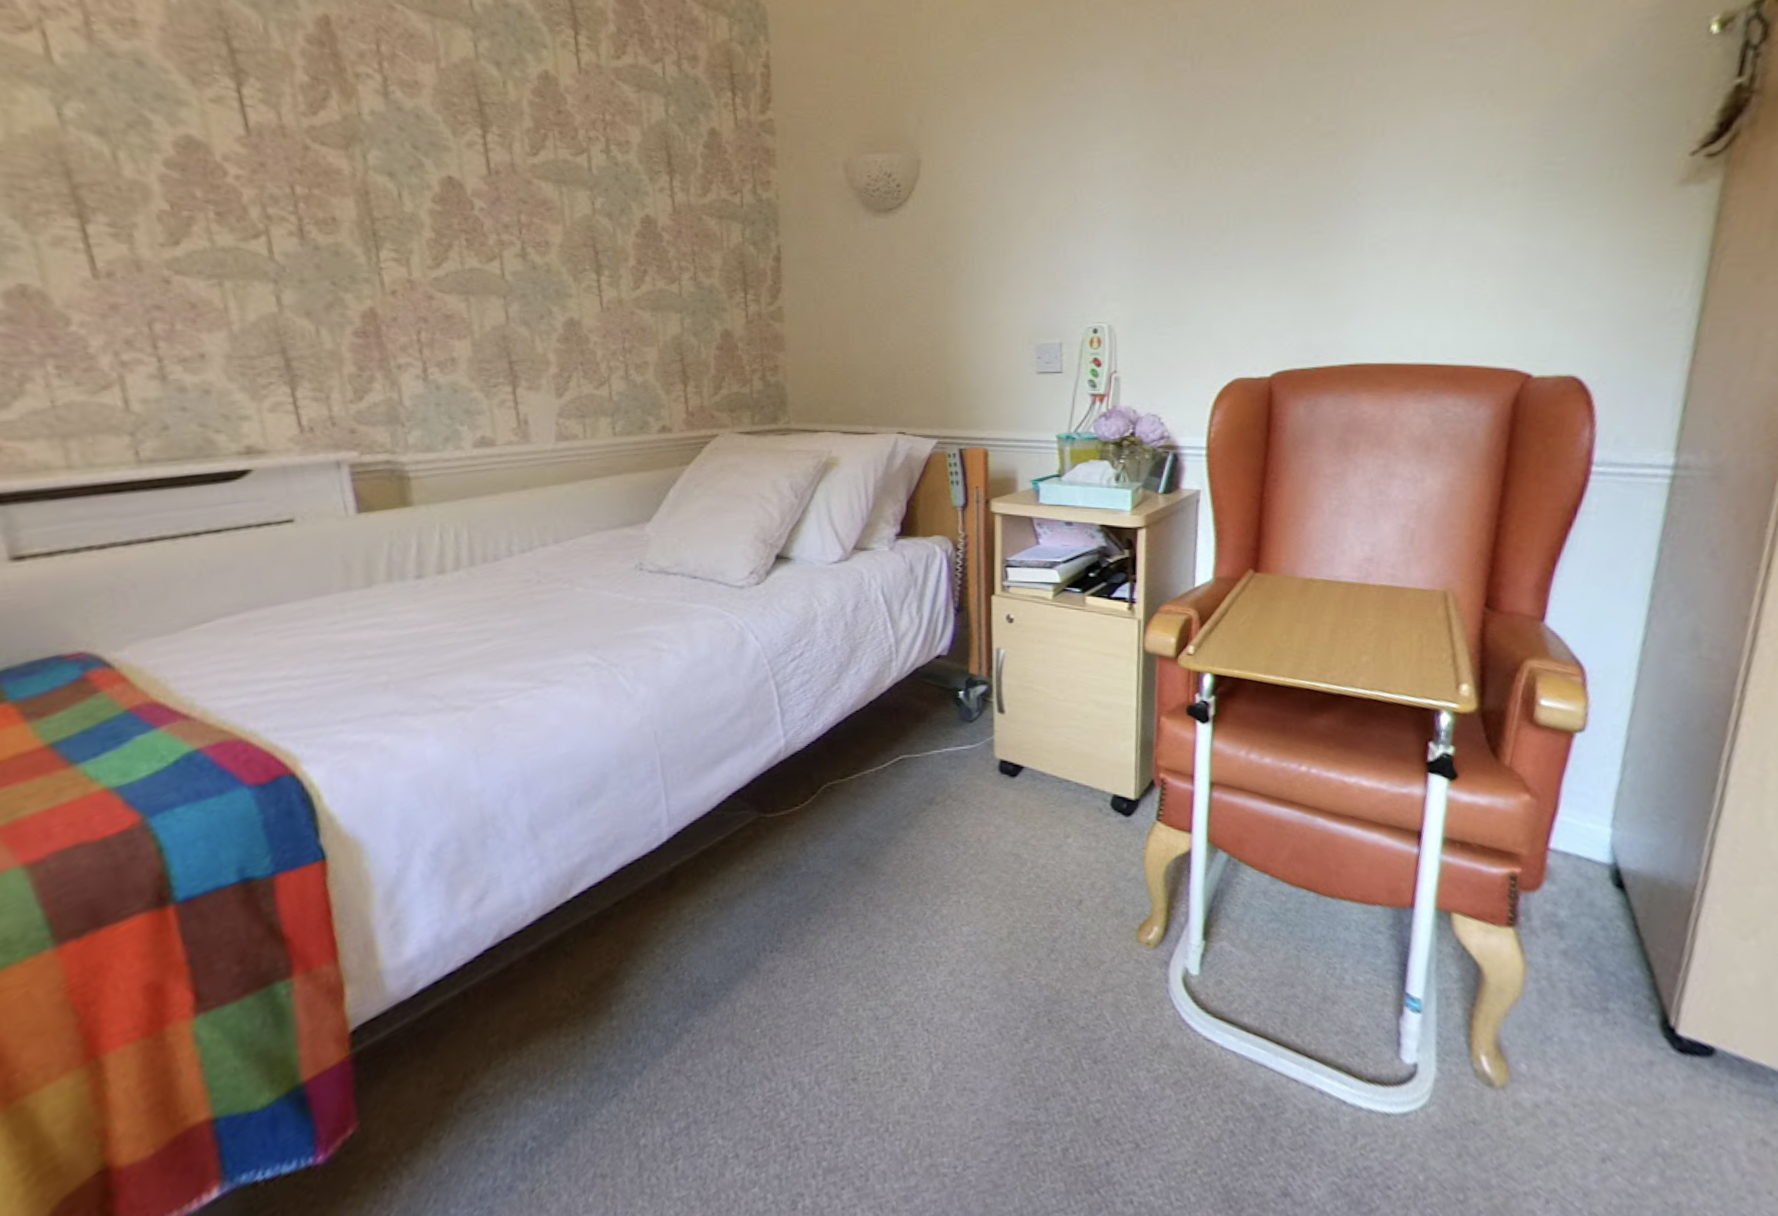 Bedroom at Peel Moat Care Home in Stockport, Greater Manchester 